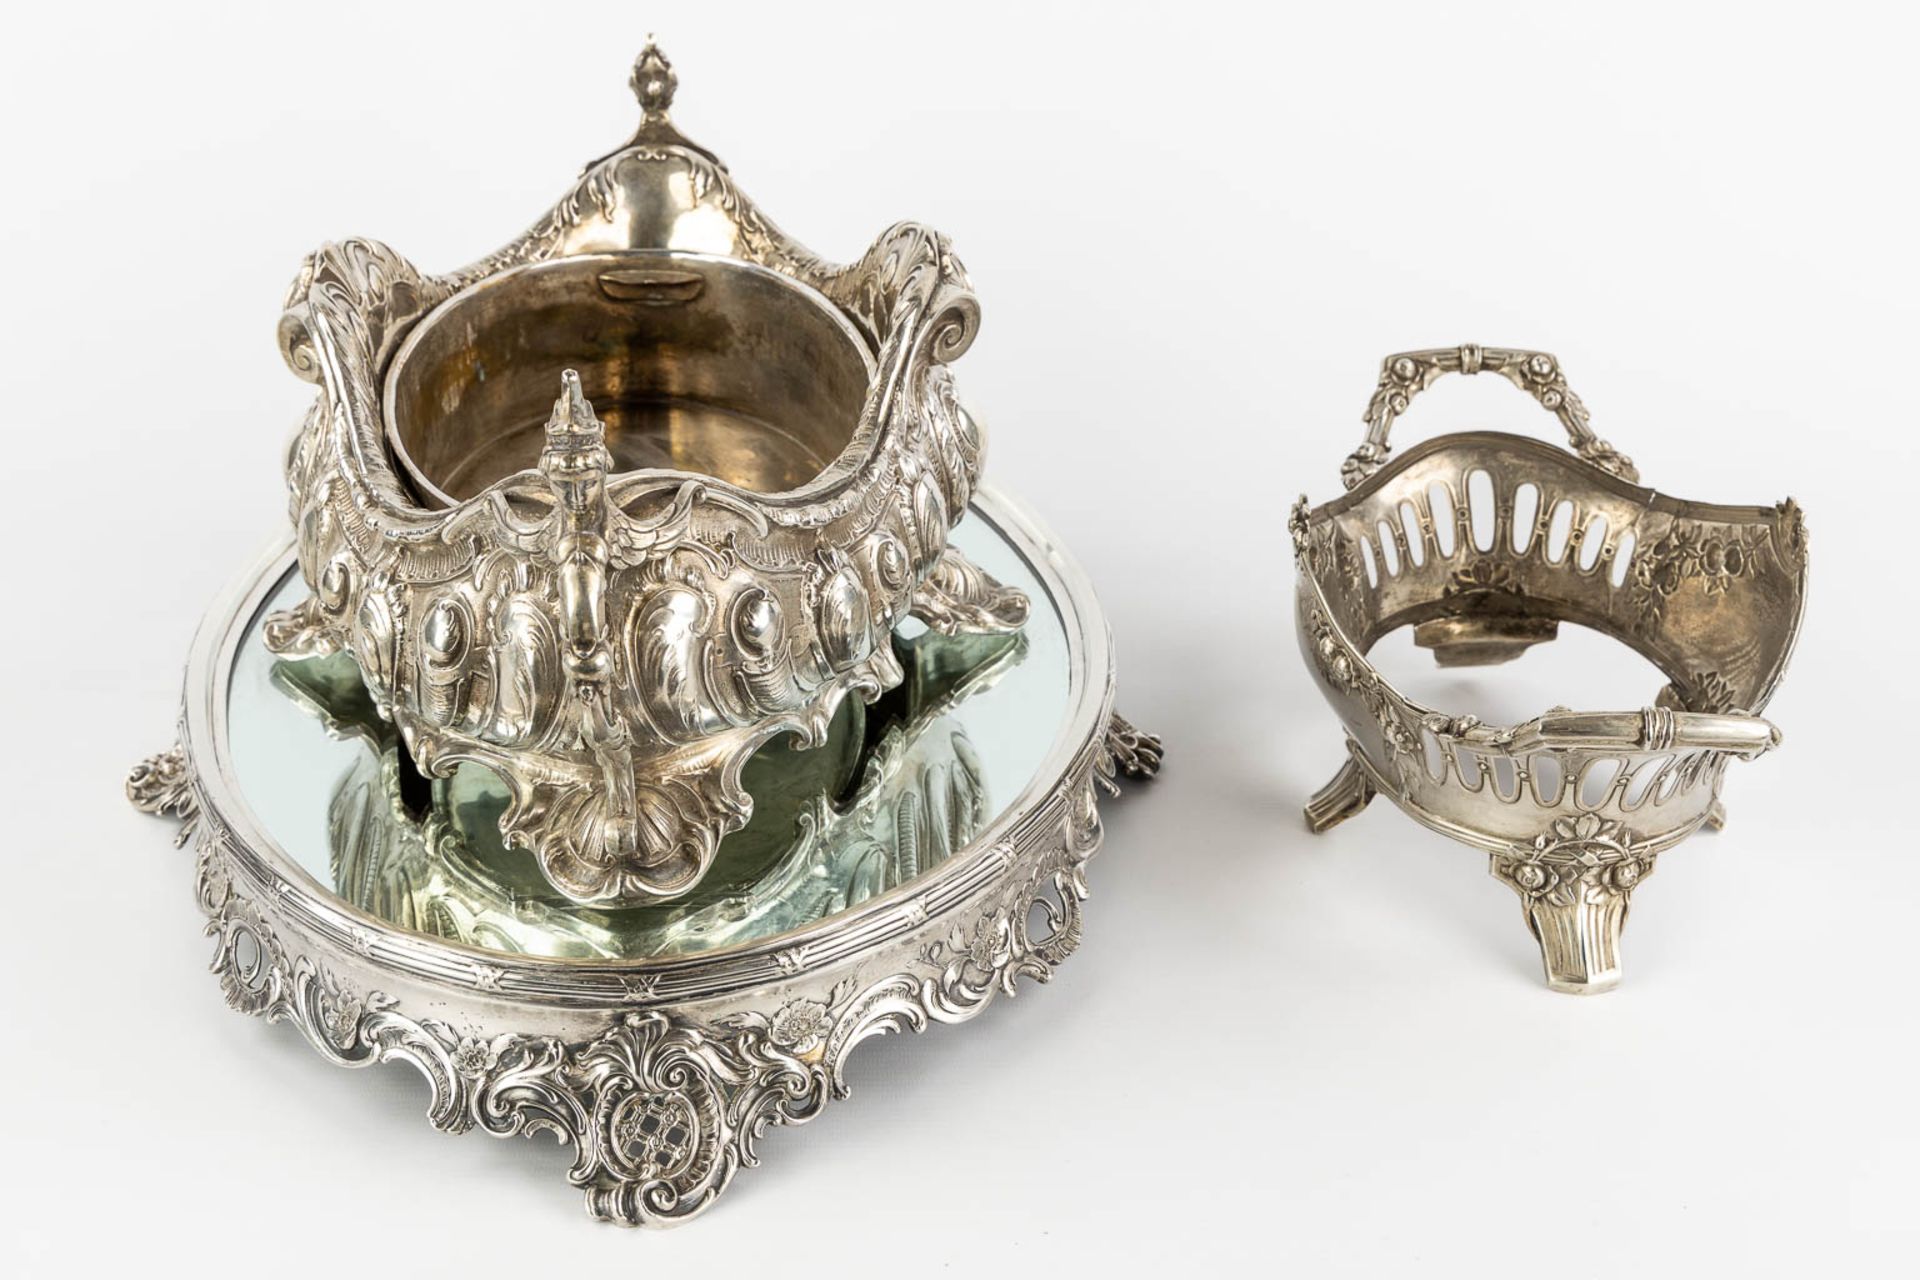 A large table centerpiece, silver, Germany. Added a basket. Circa 1900. (L:38 x W:54 x H:23 cm) - Image 4 of 12